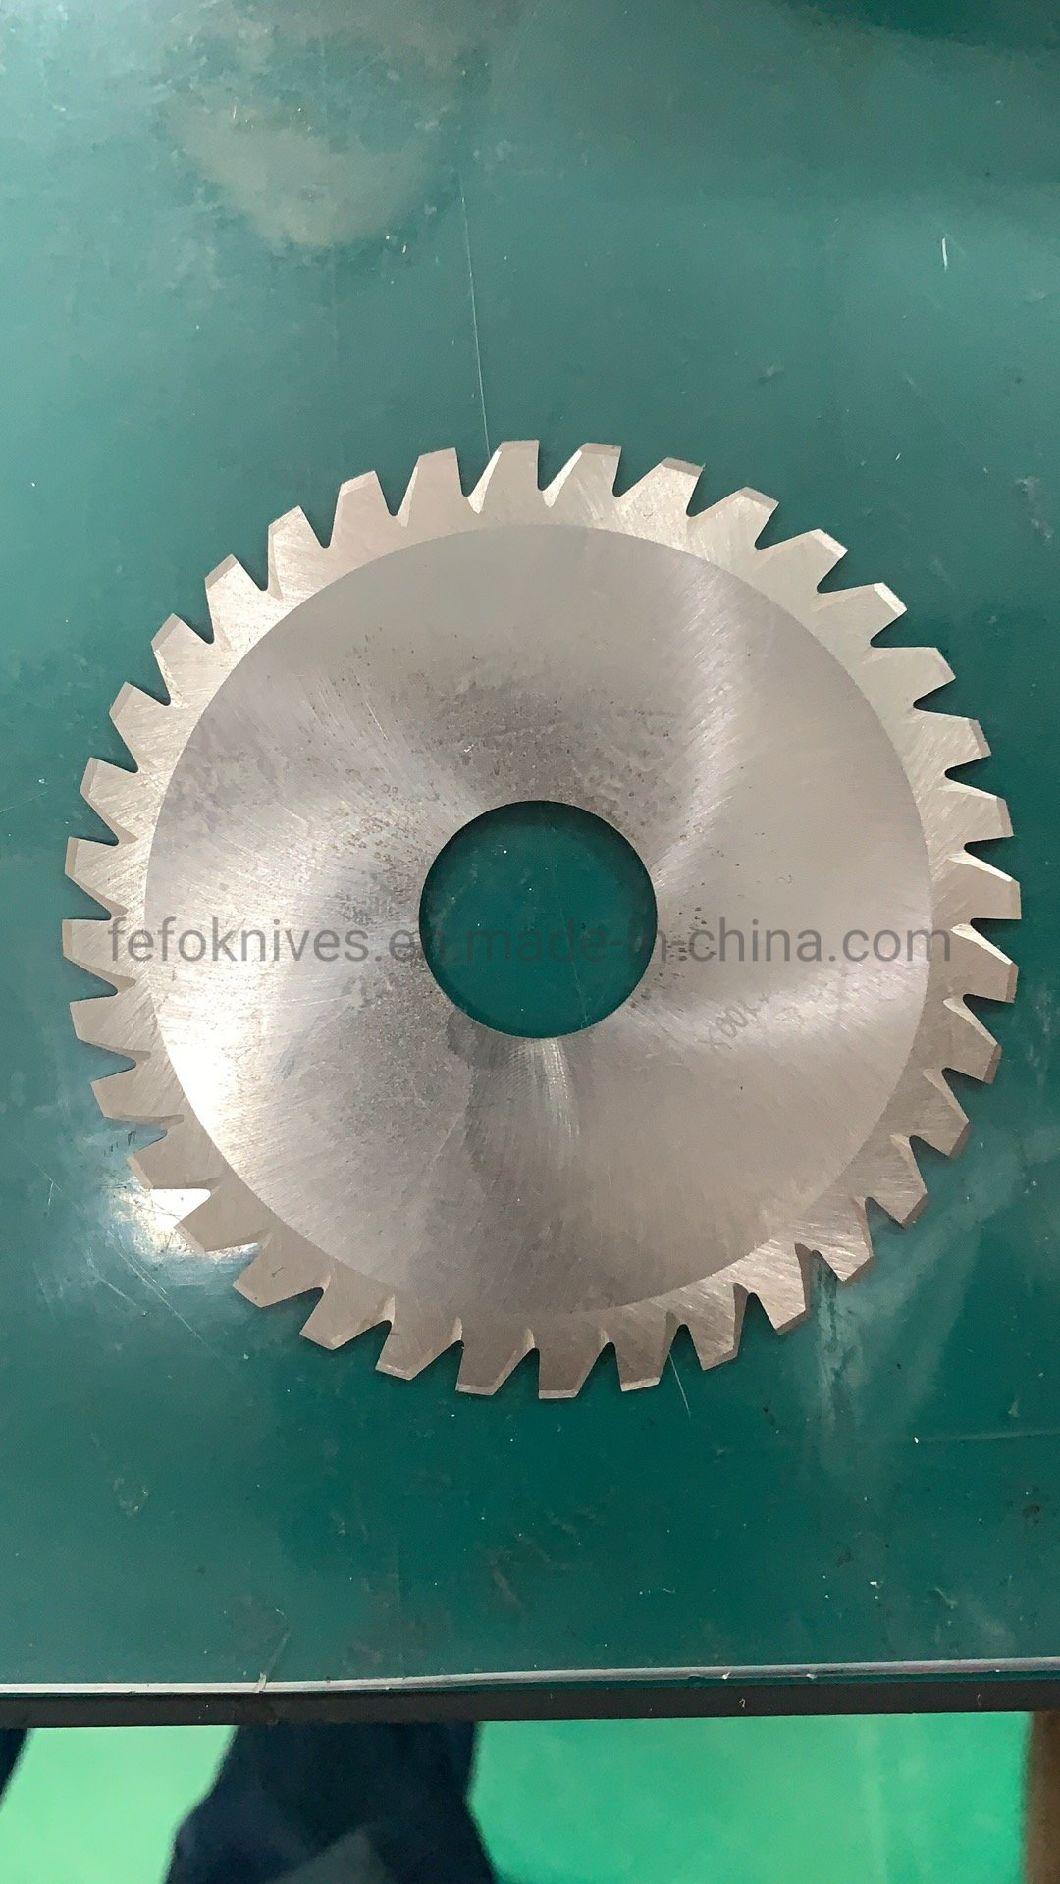 China Supply Skivers, Bias Cutters and Calendar Blades